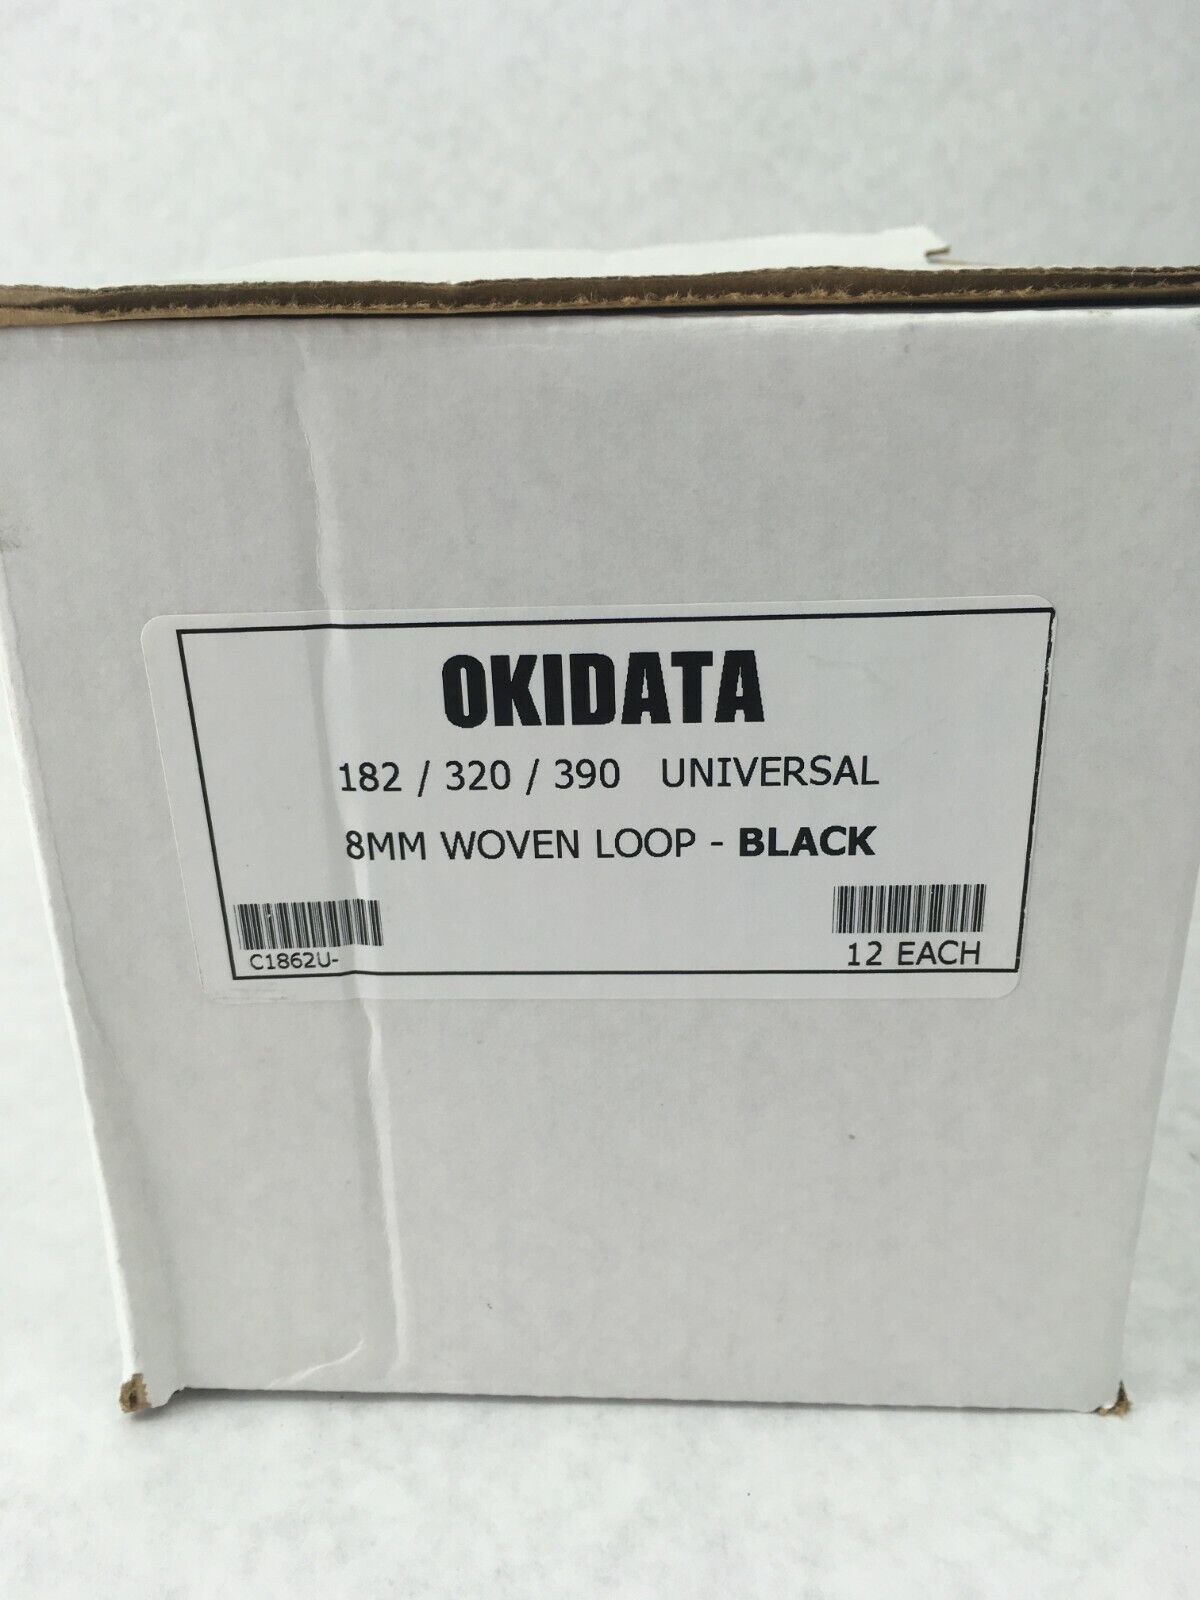 Okidata 8mm Woven Loop Black Compatible with 182/320/390 C1862U Lot of 12